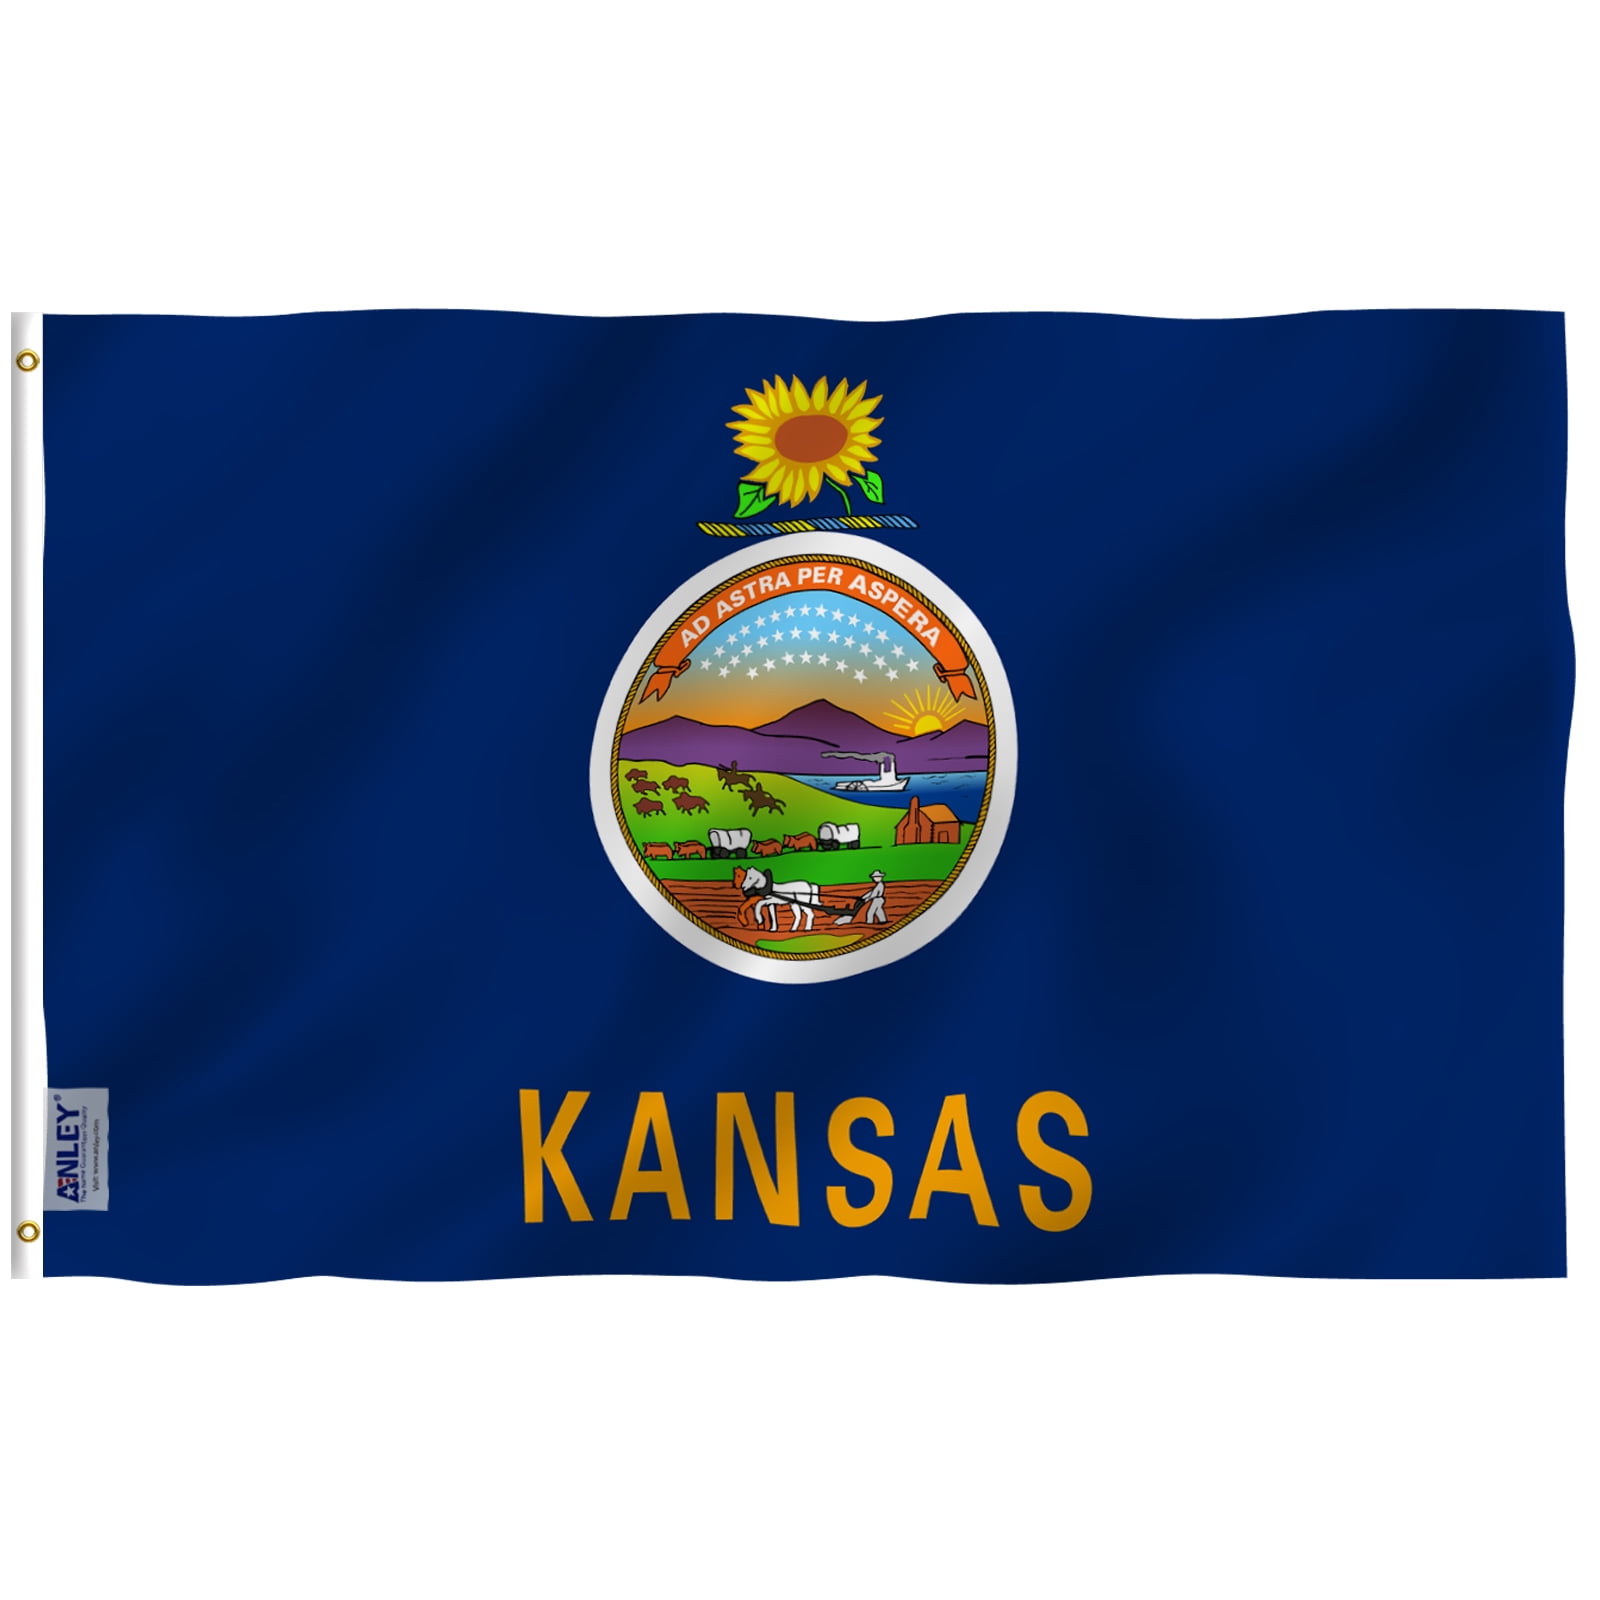 Kentucky Flag KY State Banner Pennant 2x3 foot Indoor Outdoor 24x36 inches New 